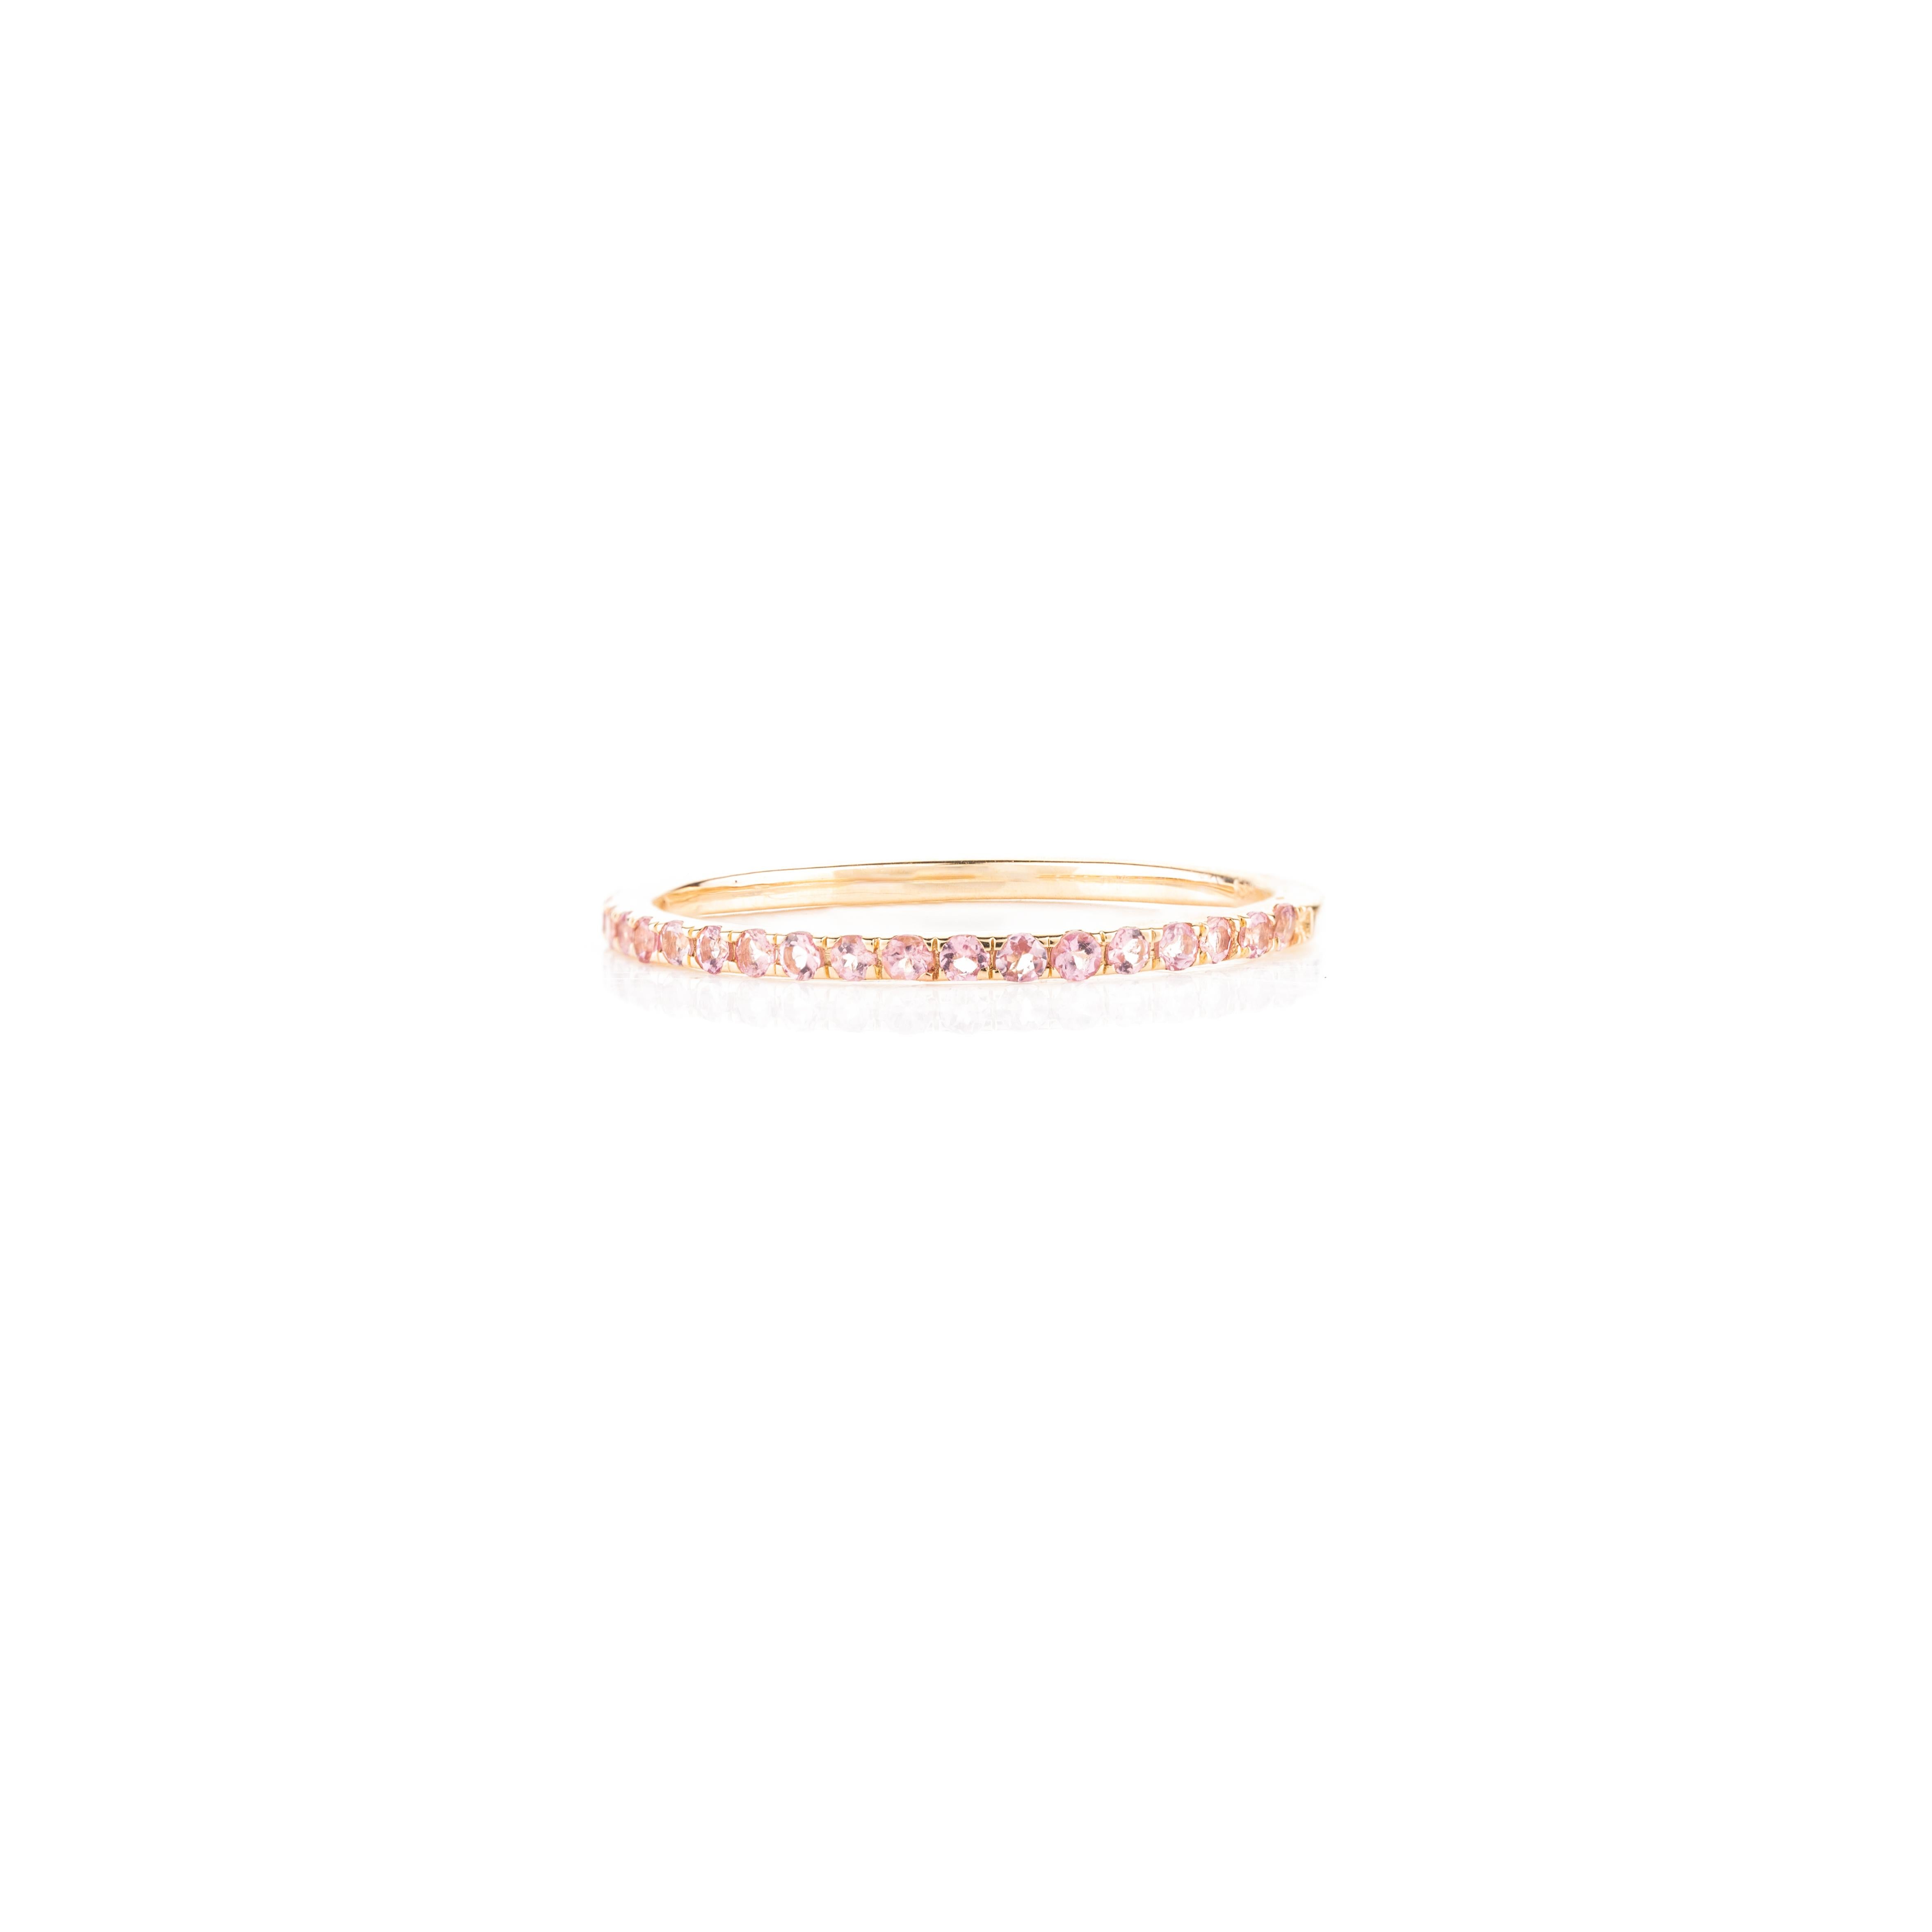 For Sale:  Stackable Thin 14k Solid Yellow Gold Tourmaline Band Ring Gift for Her 3